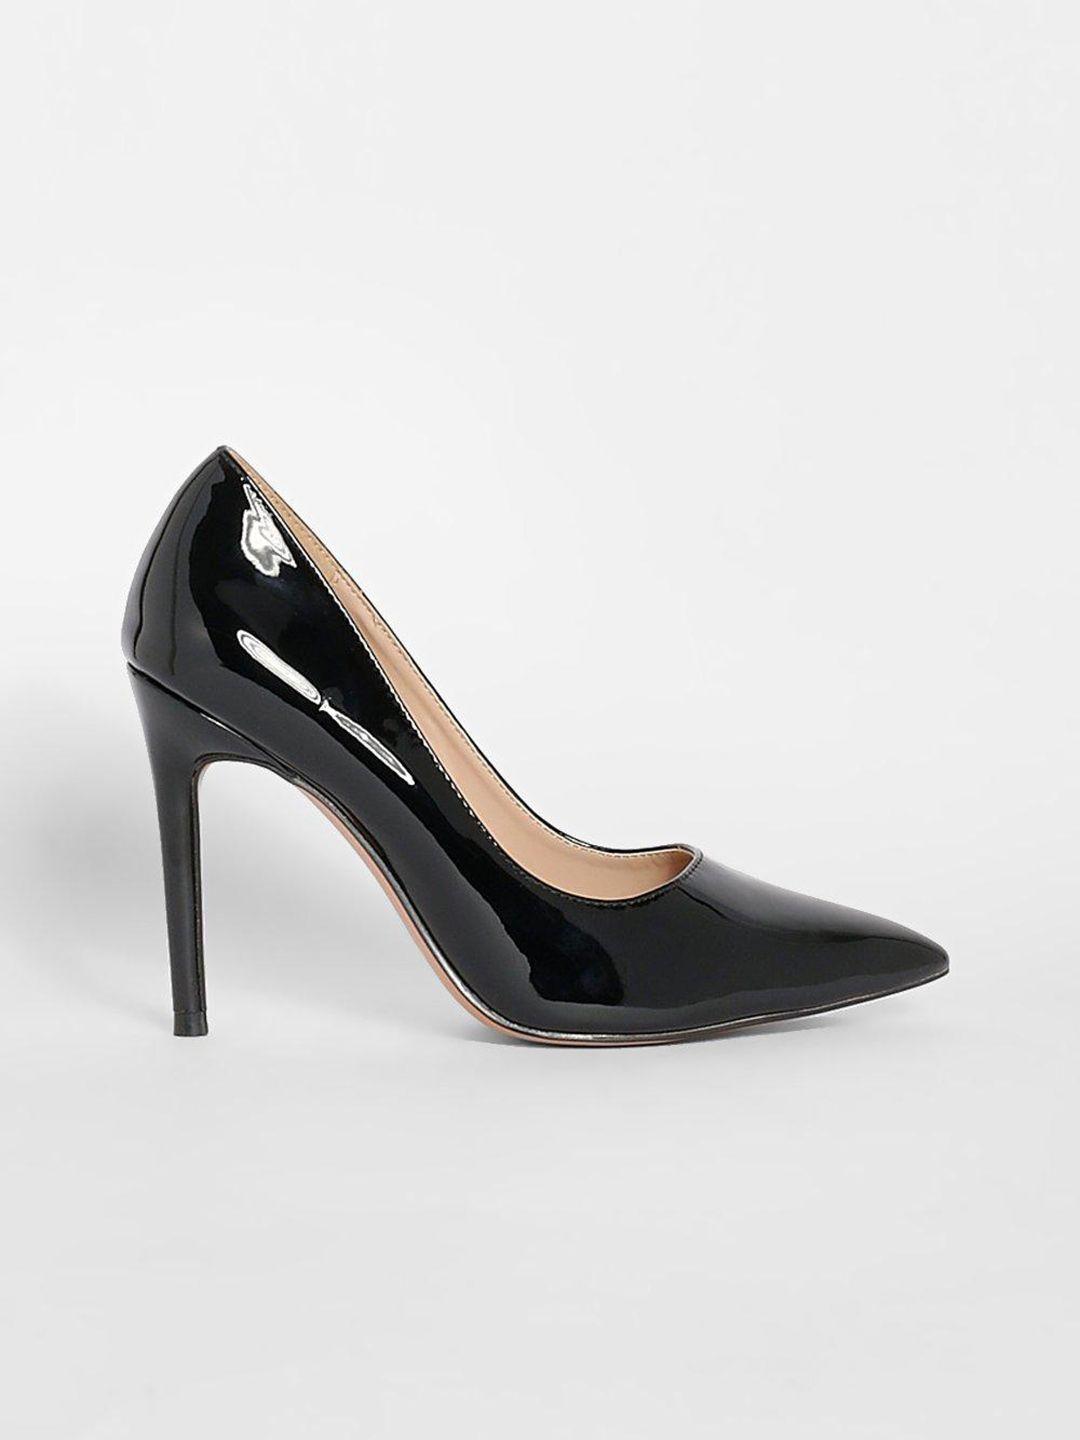 boohoo black work pumps with patent finish